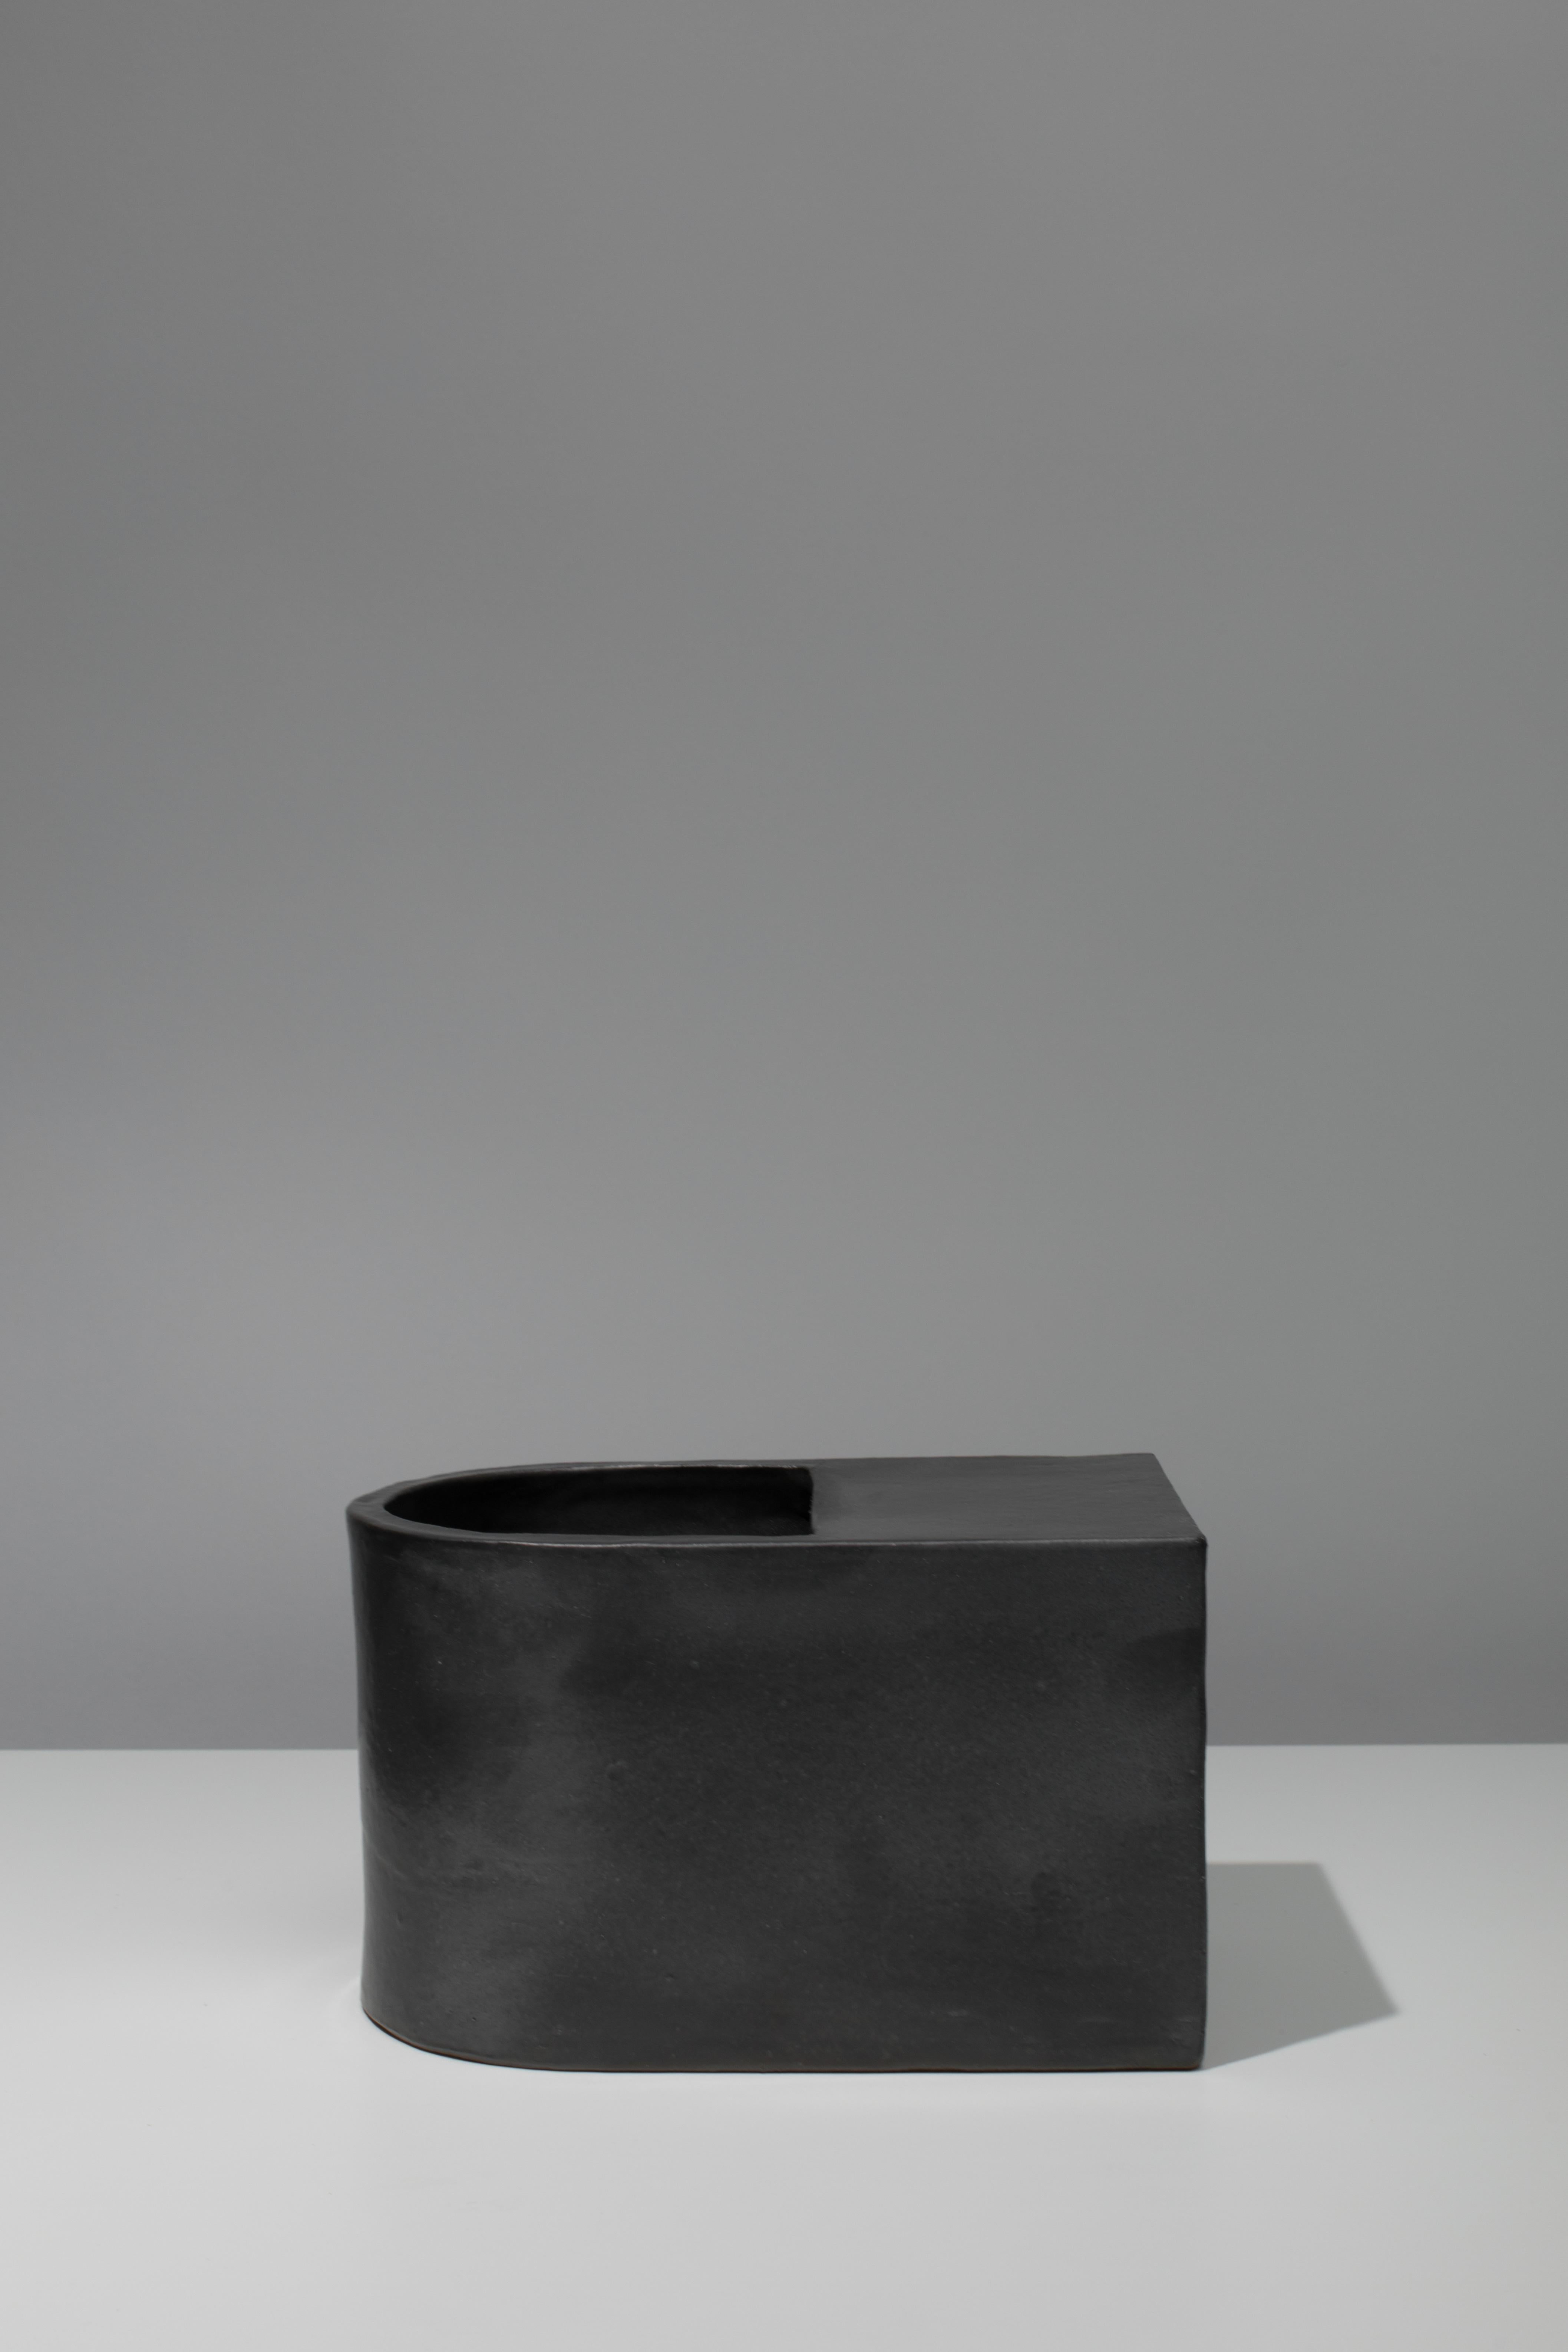 Wheel-thrown and slab-built ceramic vessel with black coppered glaze. Marked with an engraved bronze label to underside: Jonathan Nesci w/ Robert Pulley 18/08. 

Designed by Jonathan Nesci and made in Columbus, Indiana by local ceramist Robert